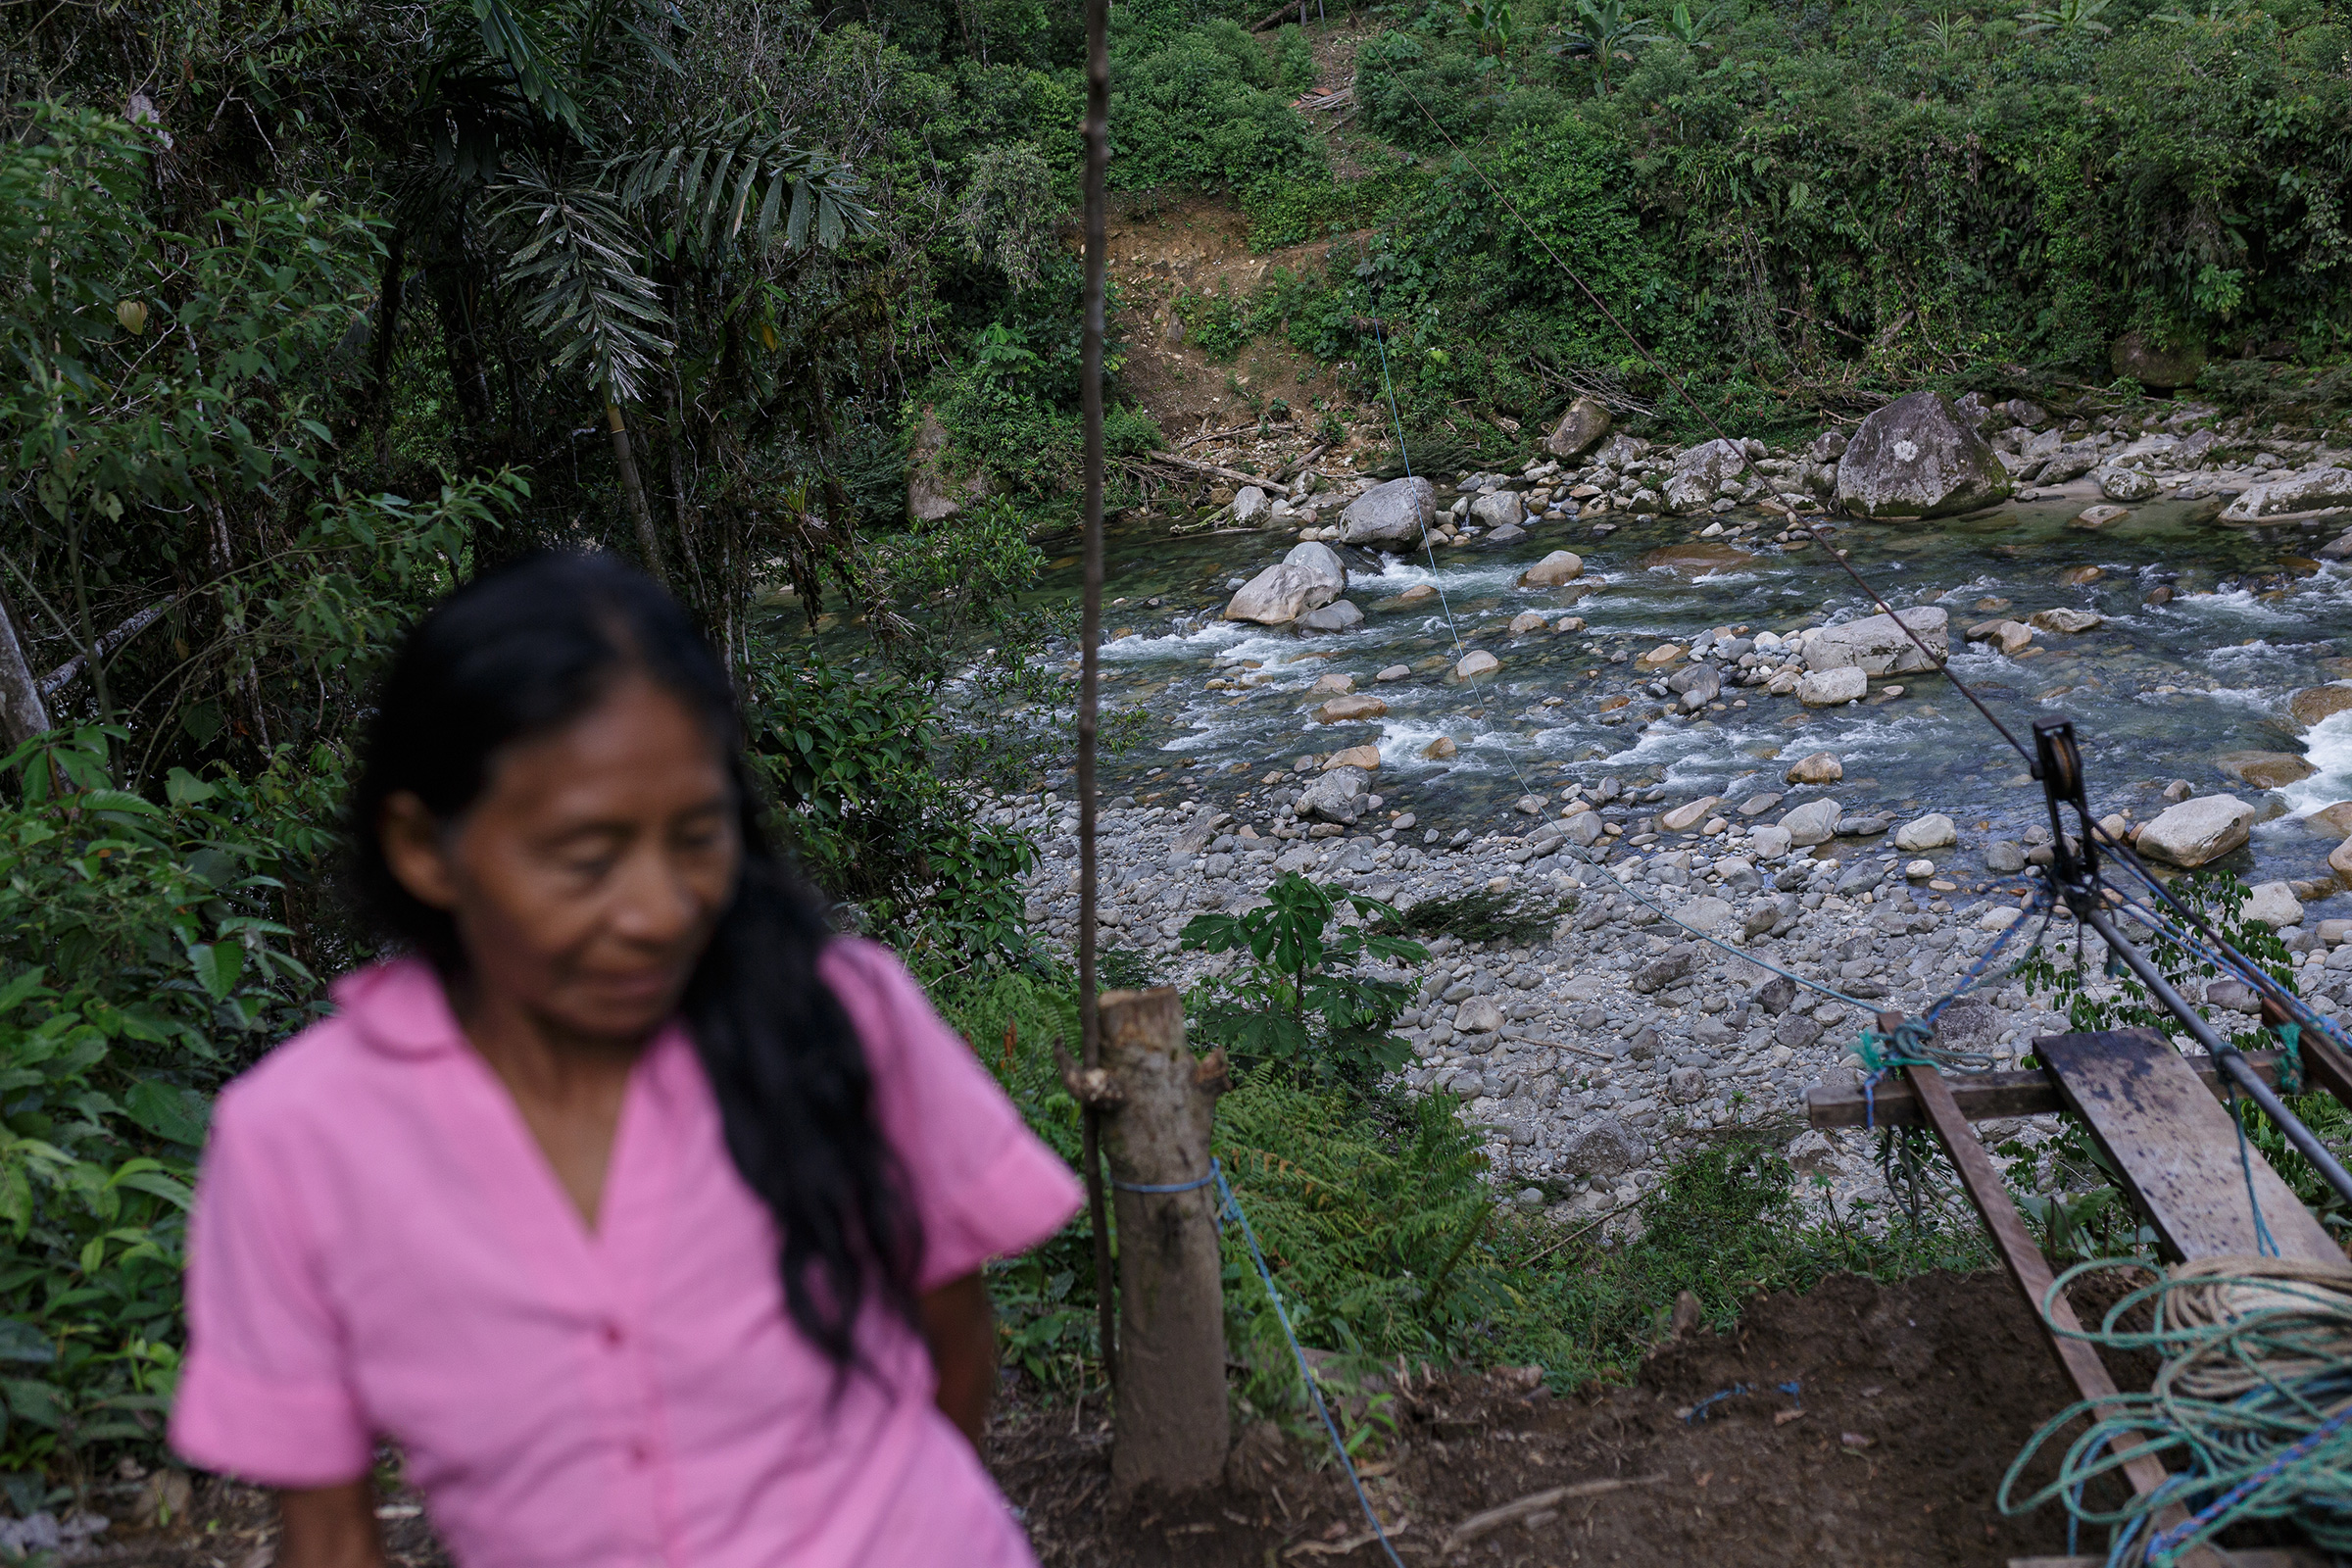 Mónica Tanguila, wife of Clemente Grefa, on the banks near a cable car connecting communities on opposite sides of the river. (Andrés Yépez for TIME)